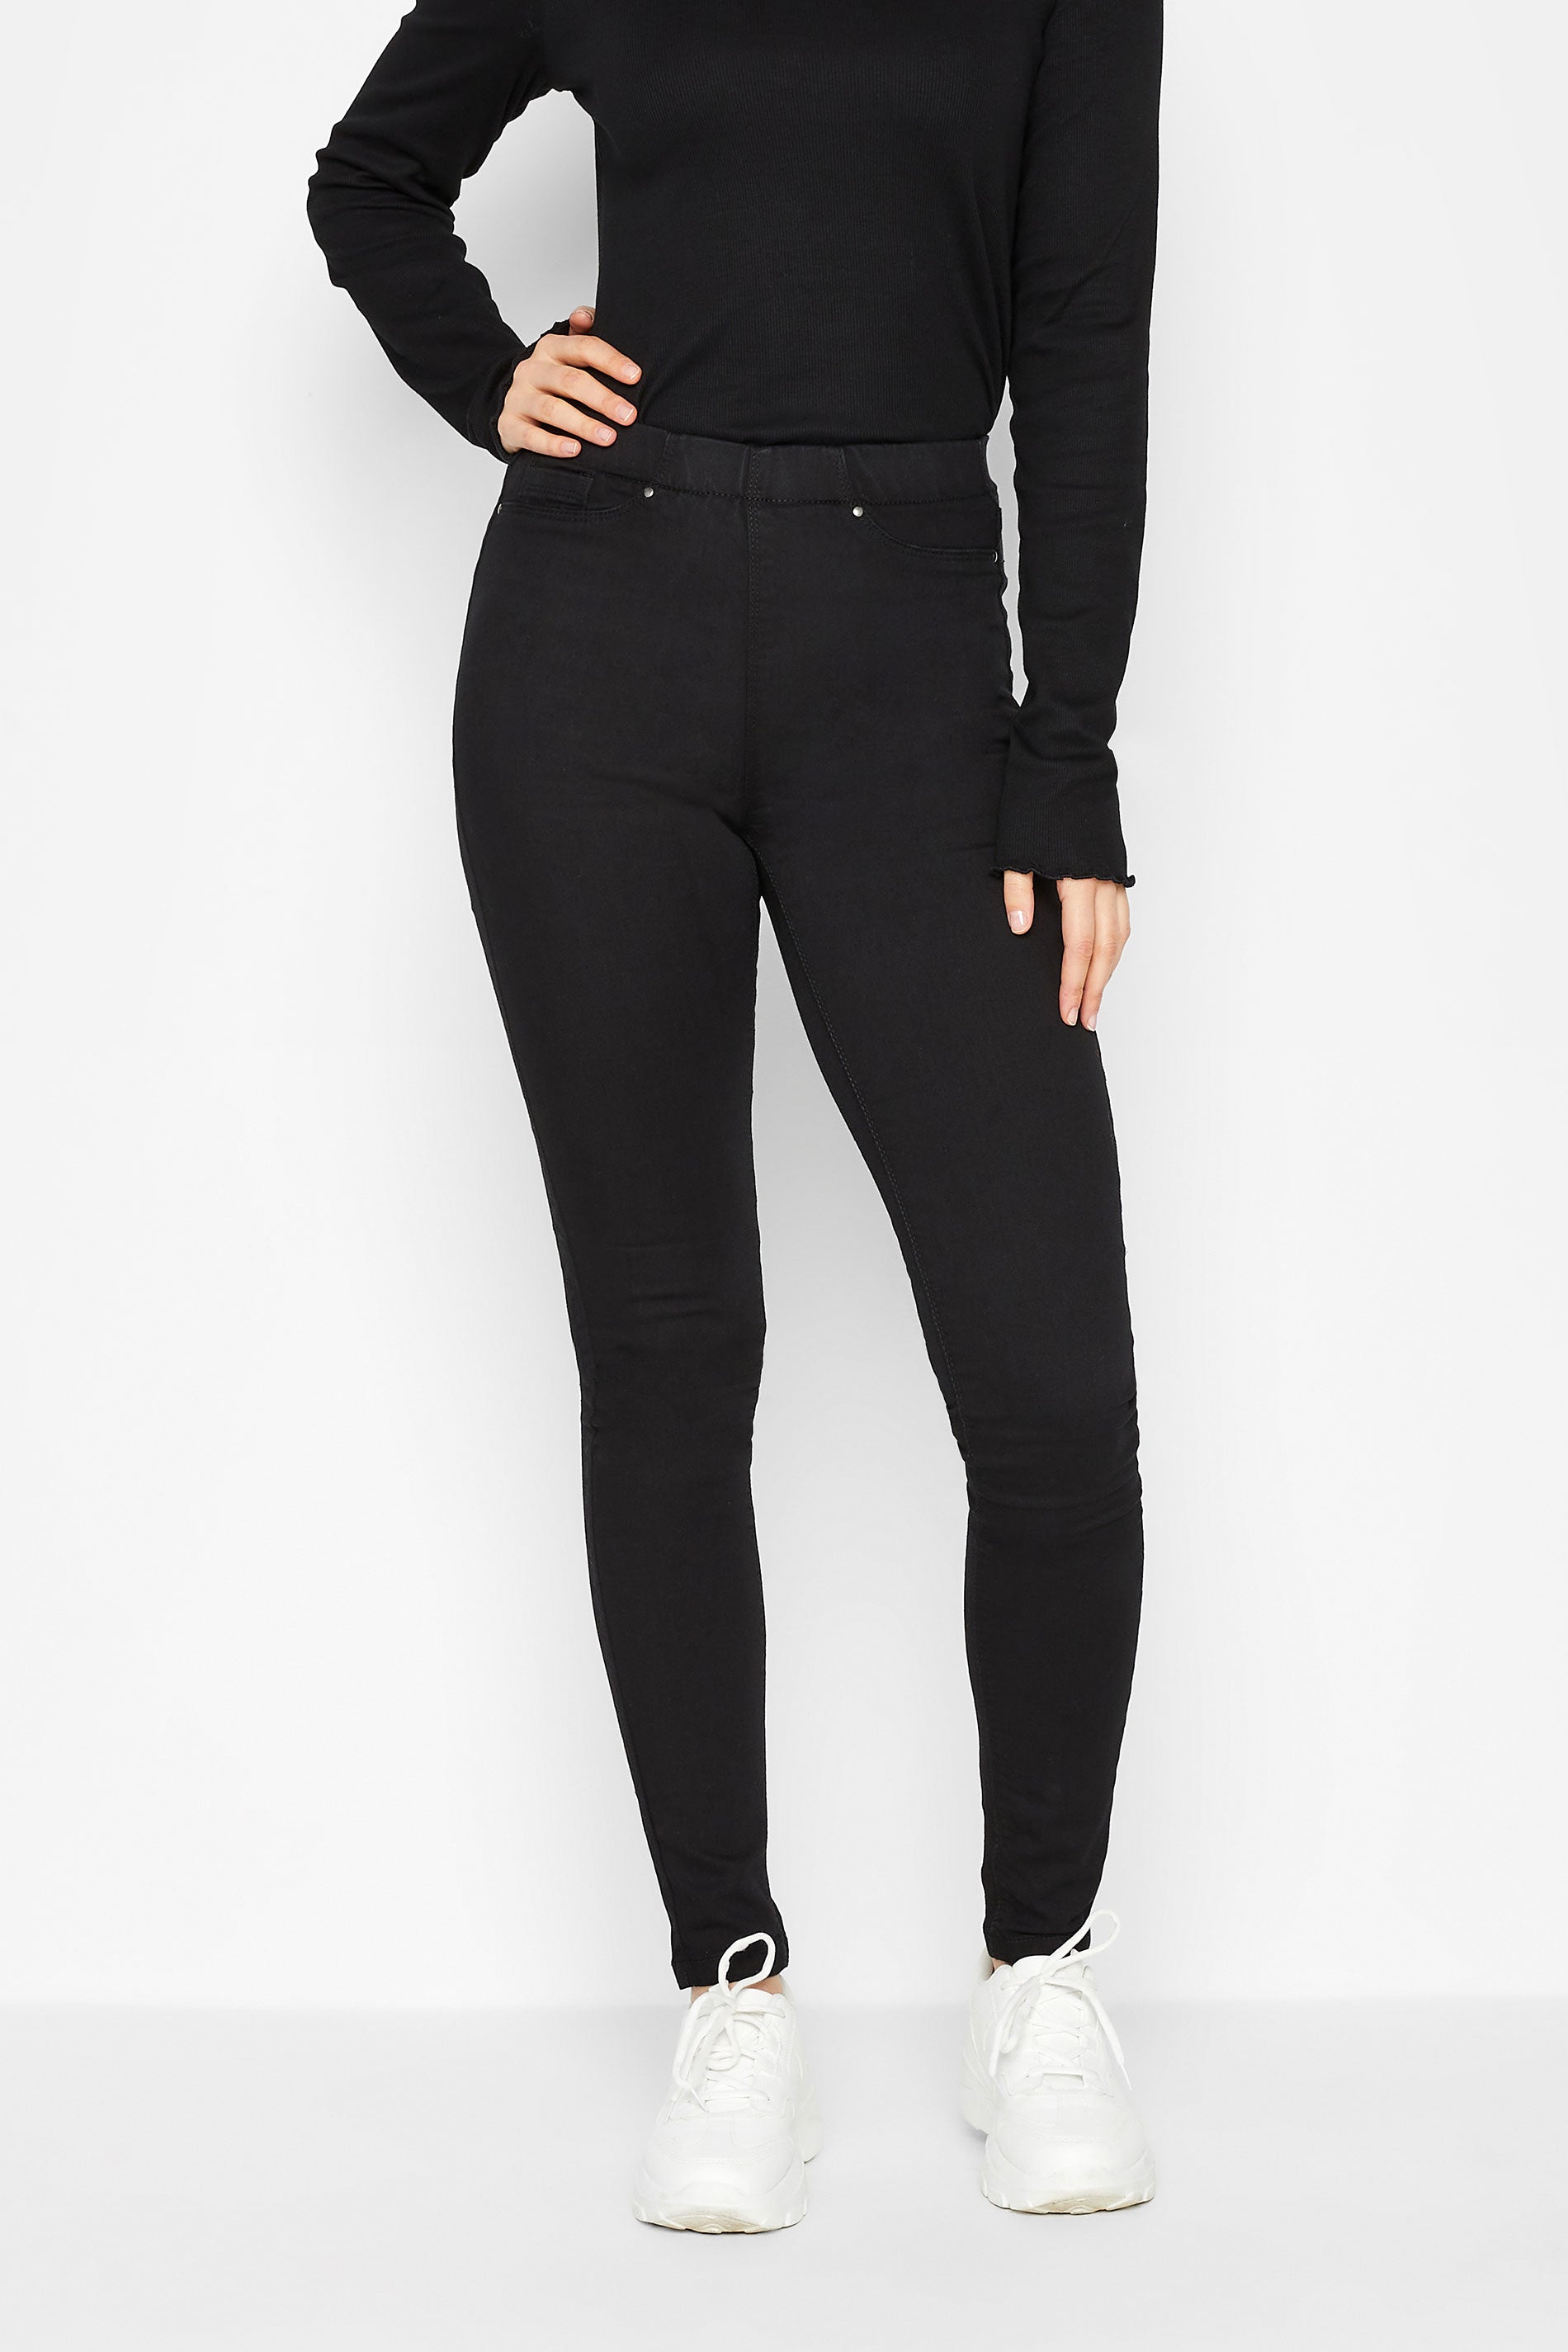 Tall Black Stretch JENNY Jeggings – Search By Inseam